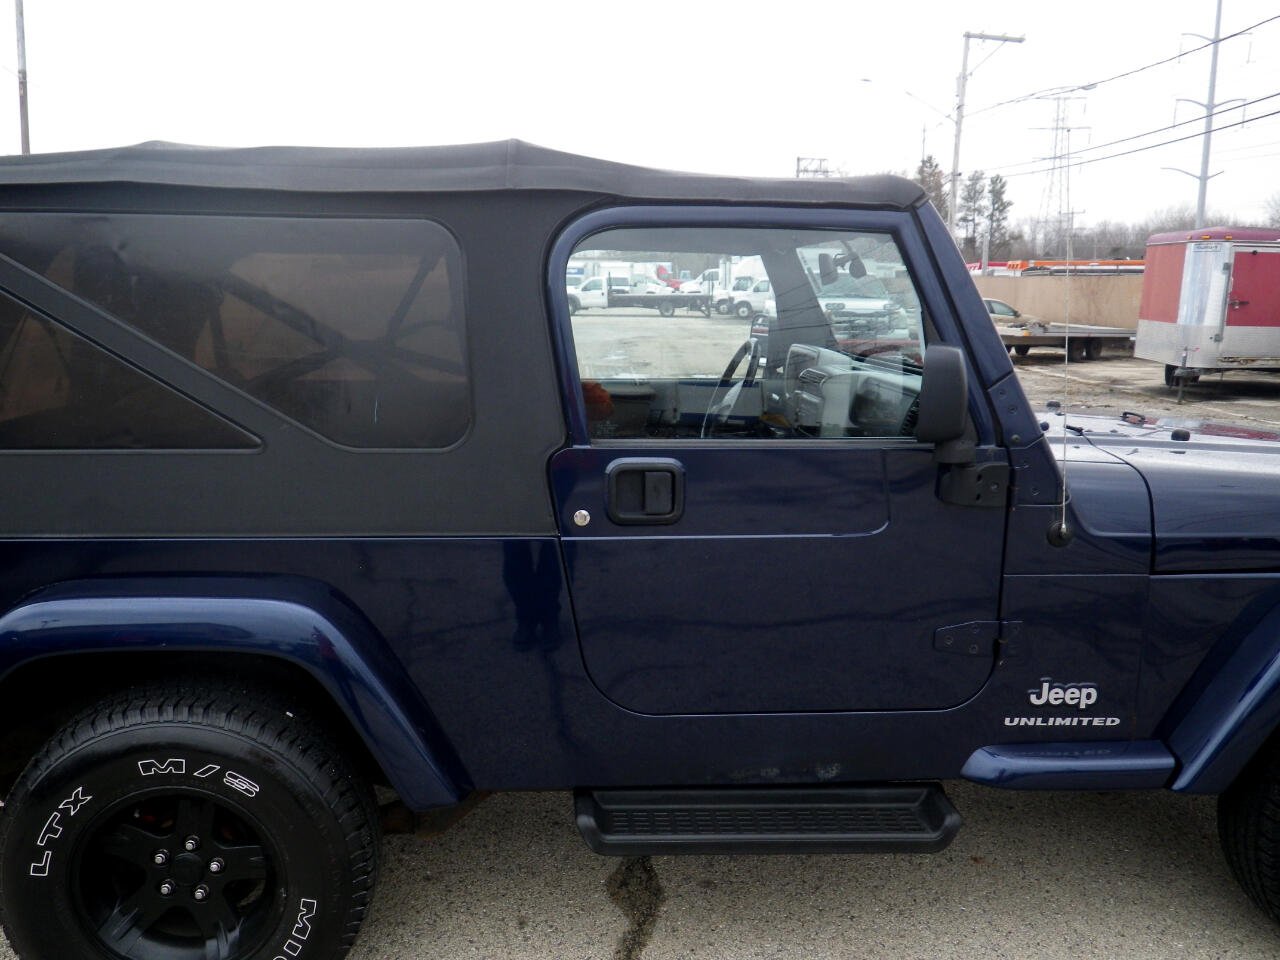 Used 2006 Jeep Wrangler 2dr Unlimited LWB for Sale in Waukegan IL 60085  Jack-Son Auto Sales